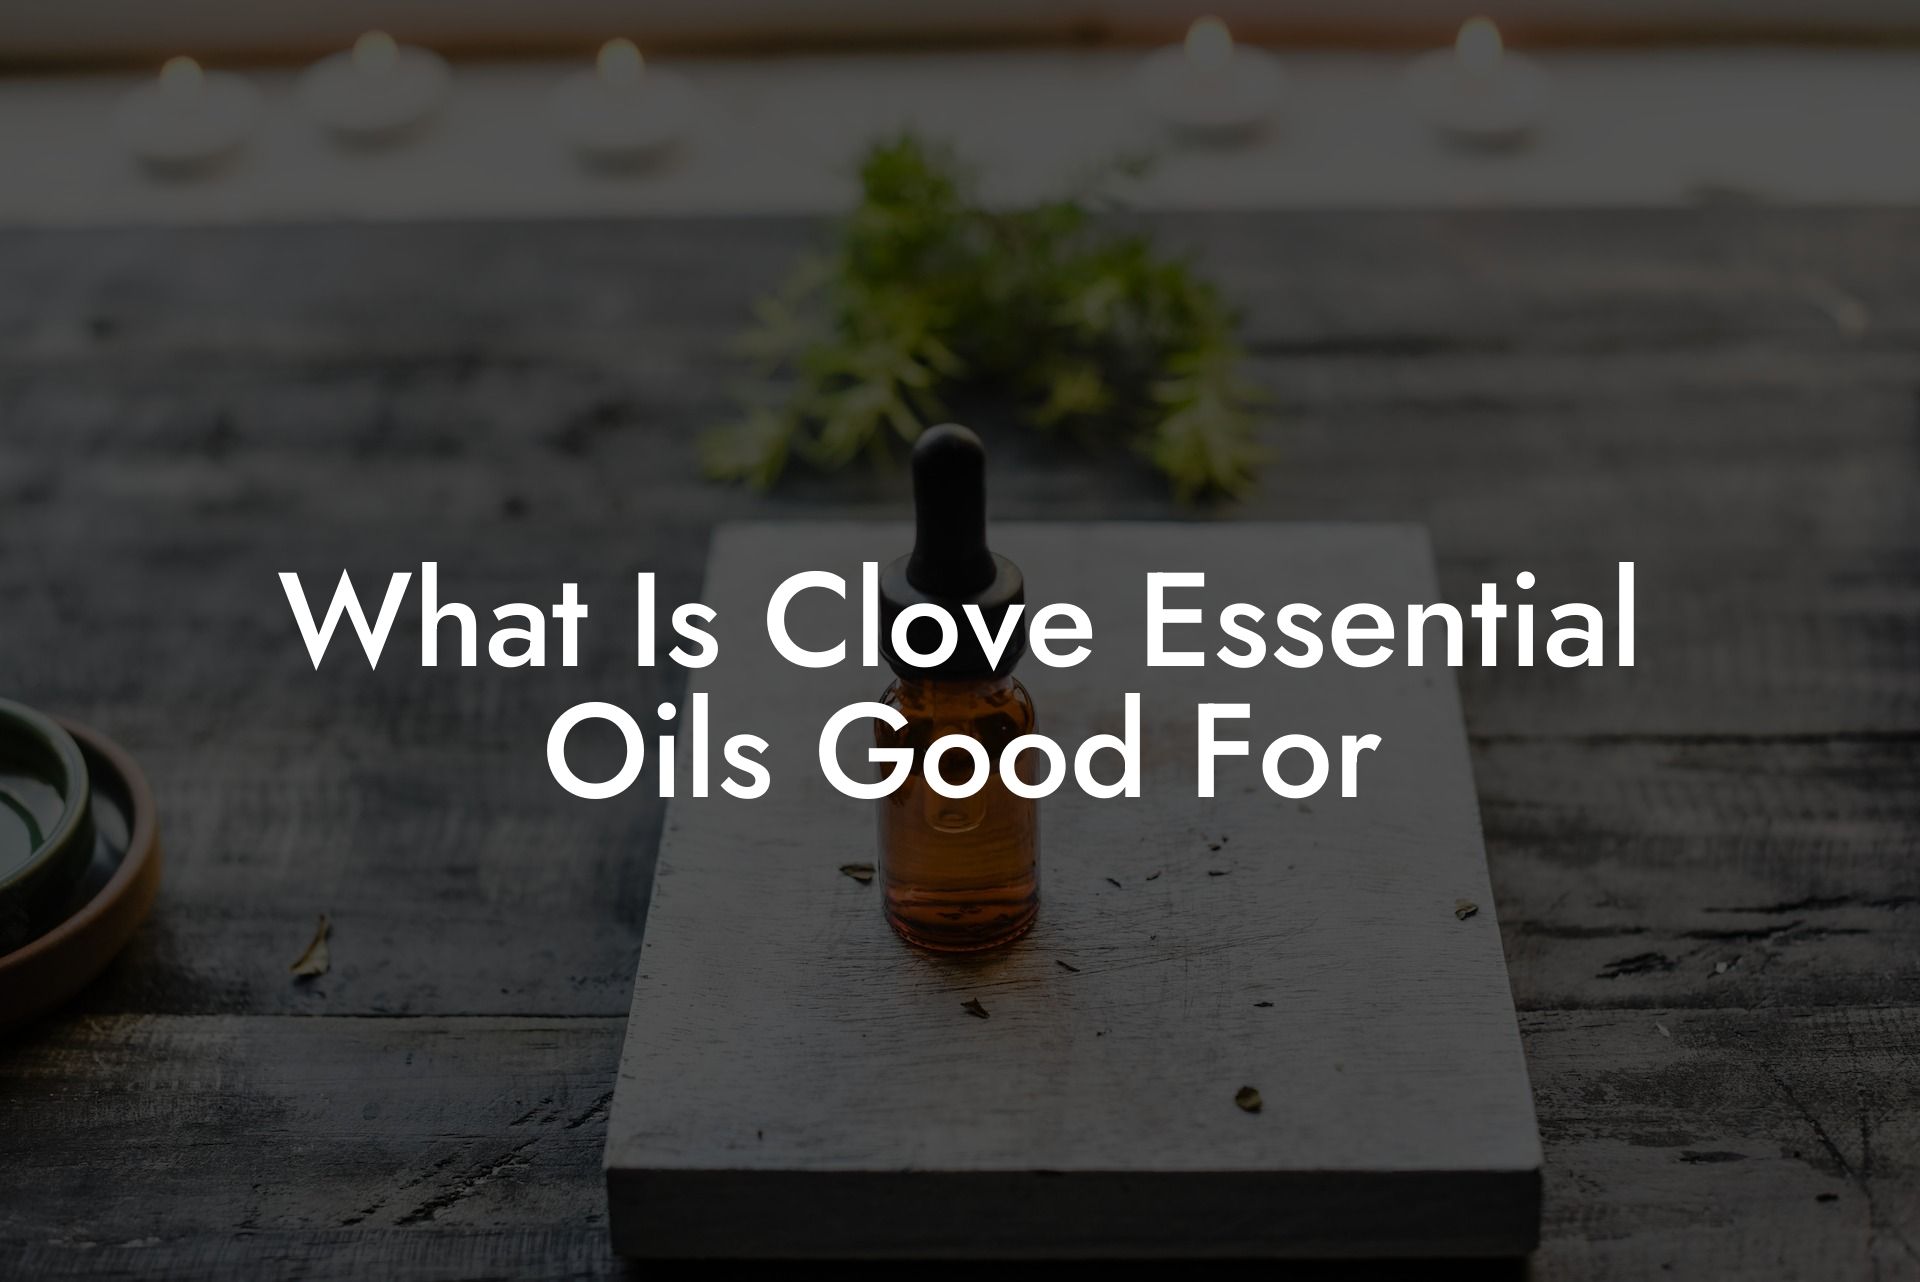 What Is Clove Essential Oils Good For